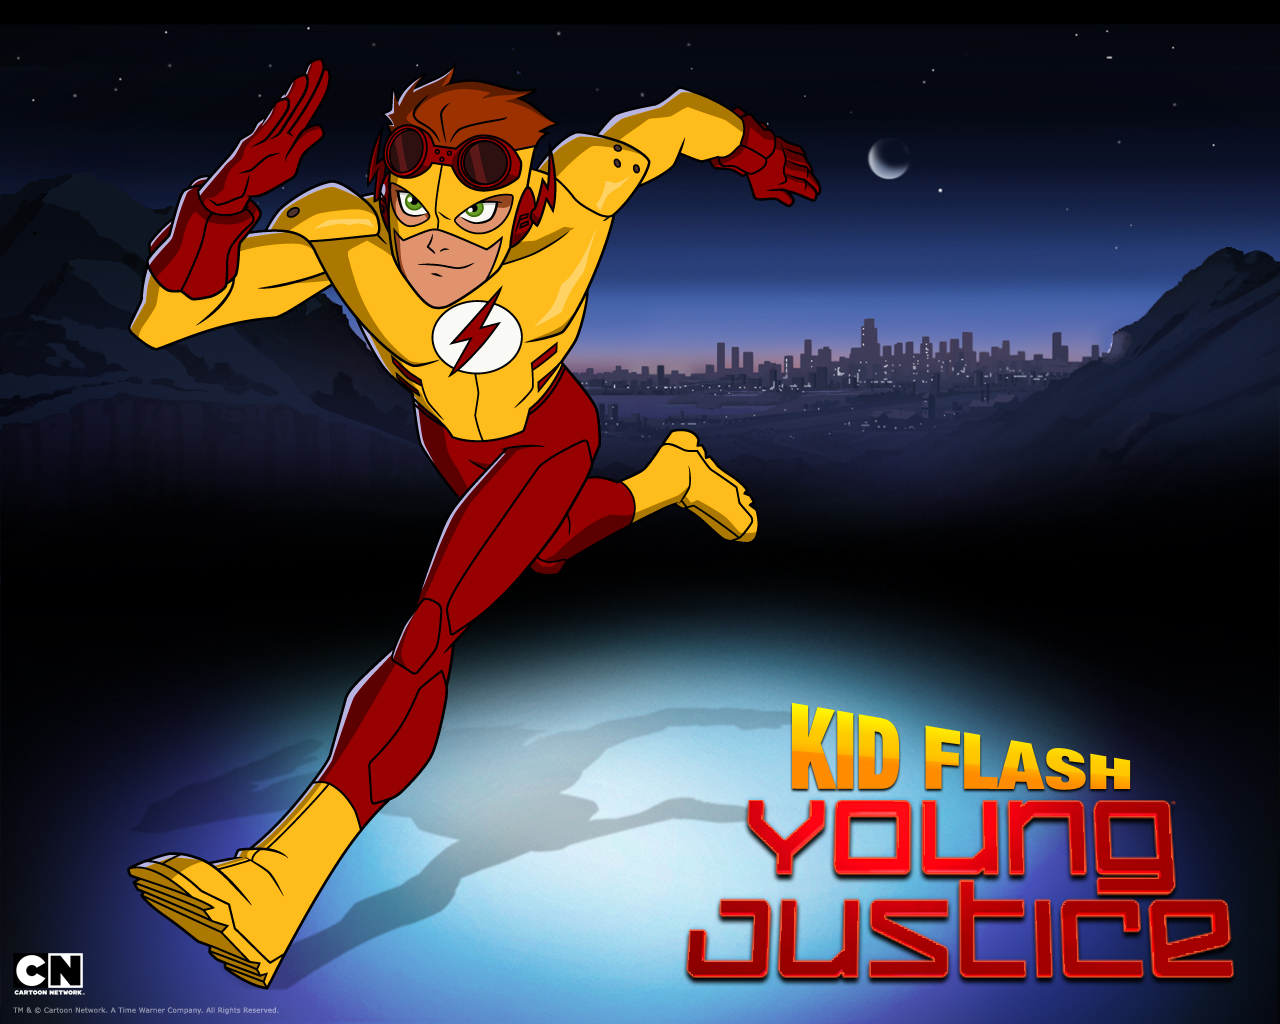 Download image Young Justice Kid Flash Wallpaper PC, Android, iPhone ...